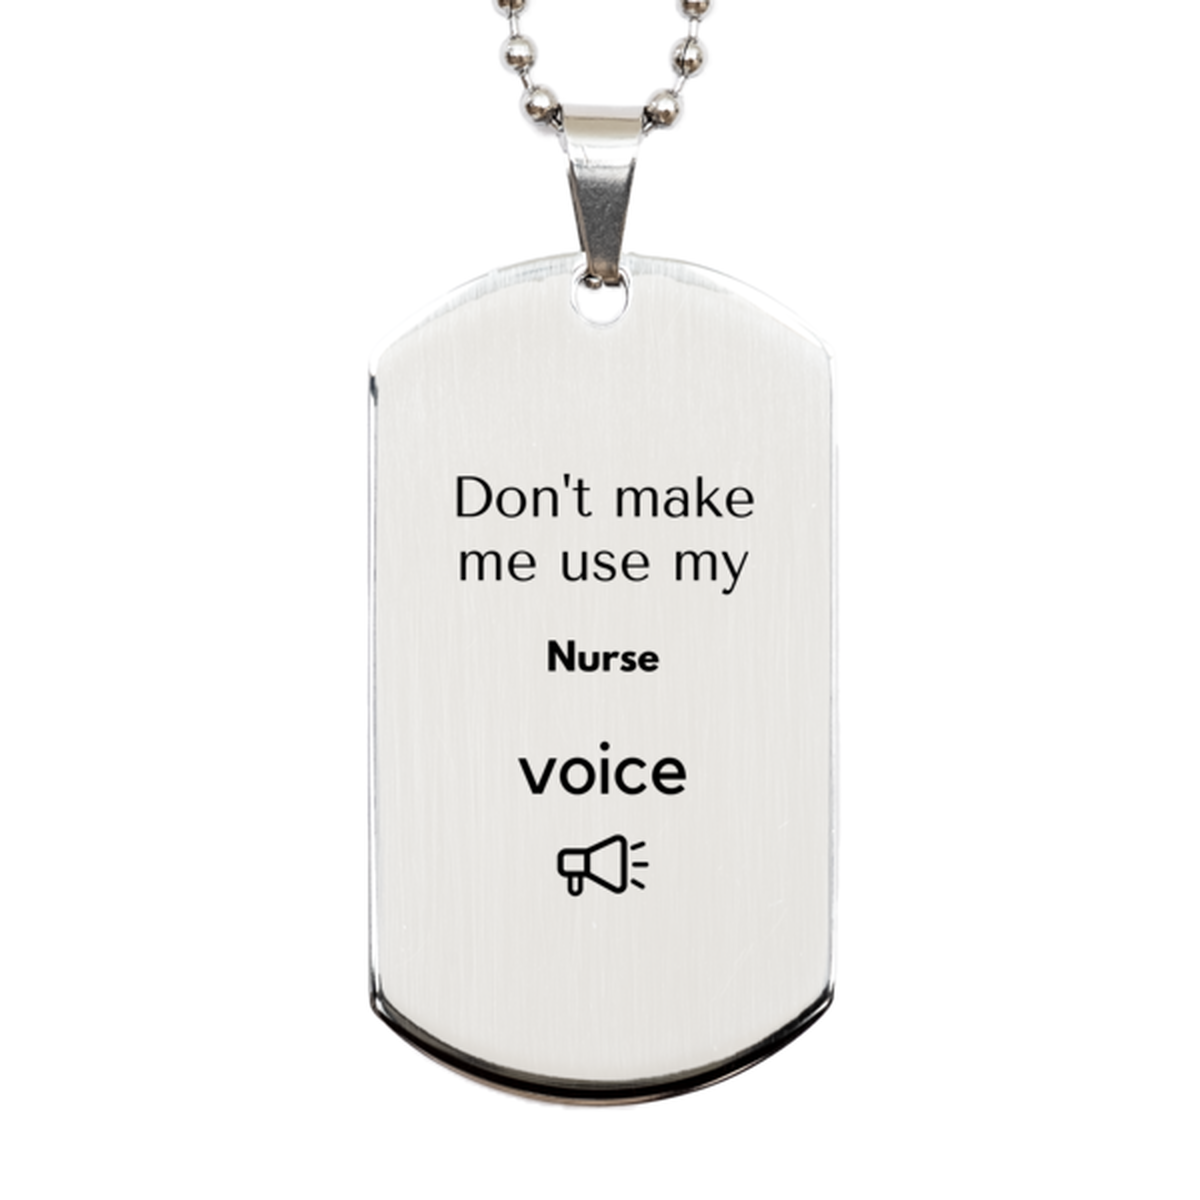 Don't make me use my Nurse voice, Sarcasm Nurse Gifts, Christmas Nurse Silver Dog Tag Birthday Unique Gifts For Nurse Coworkers, Men, Women, Colleague, Friends